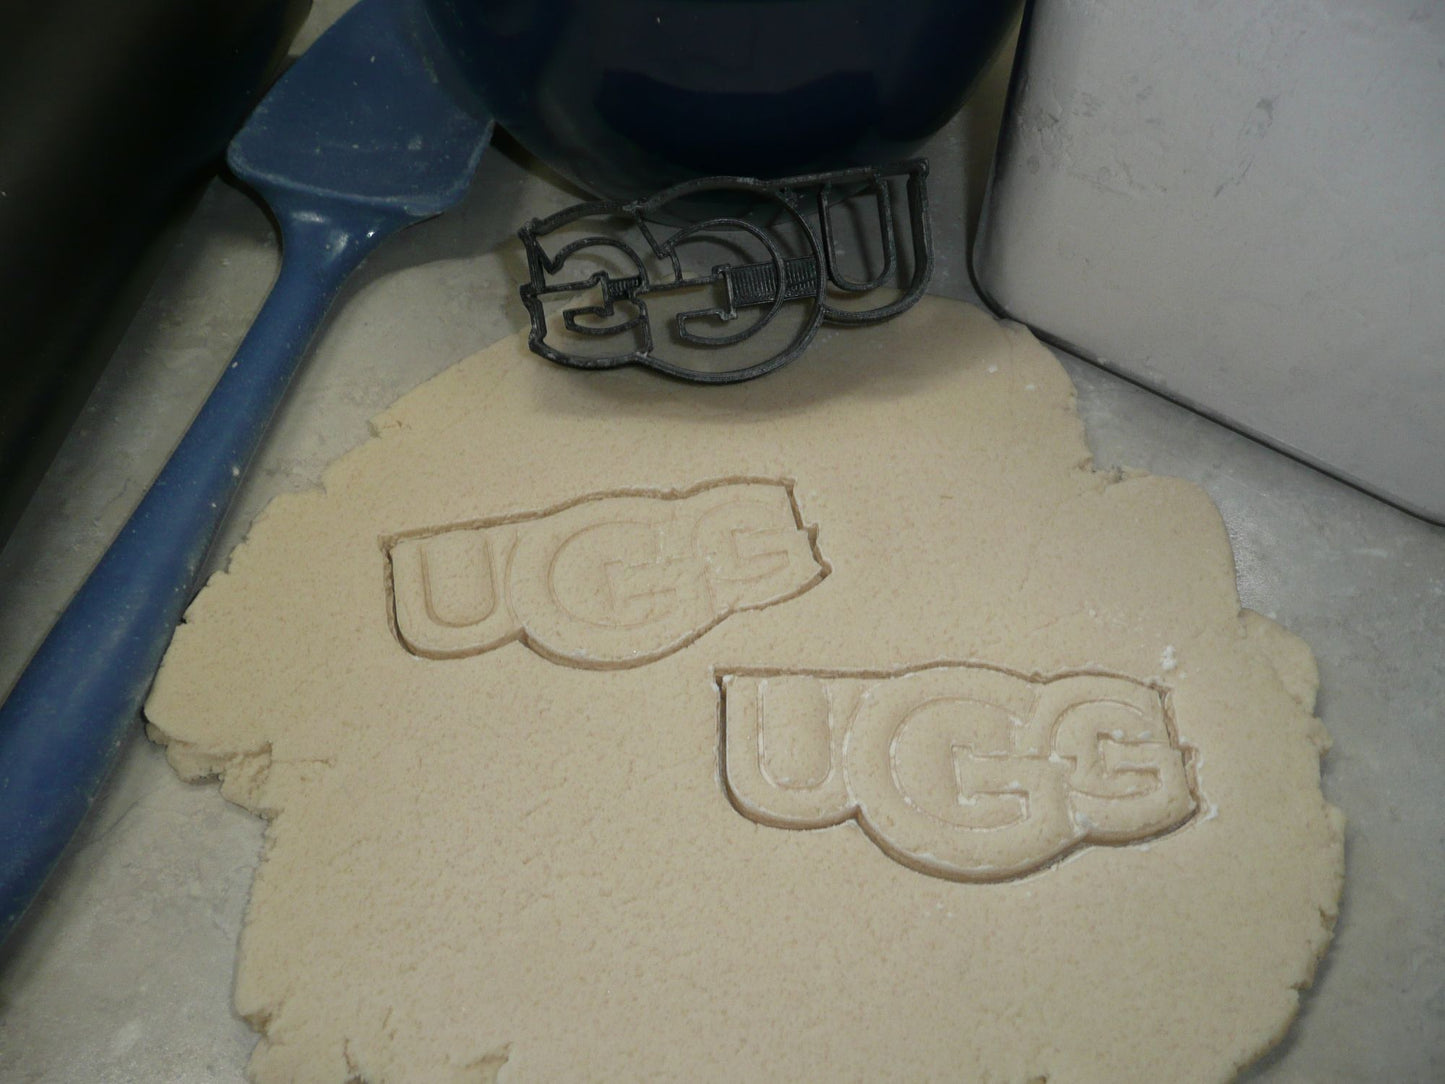 Ugg Footwear Shoes Boots Fashion Brand Cookie Cutter Made in USA PR4260